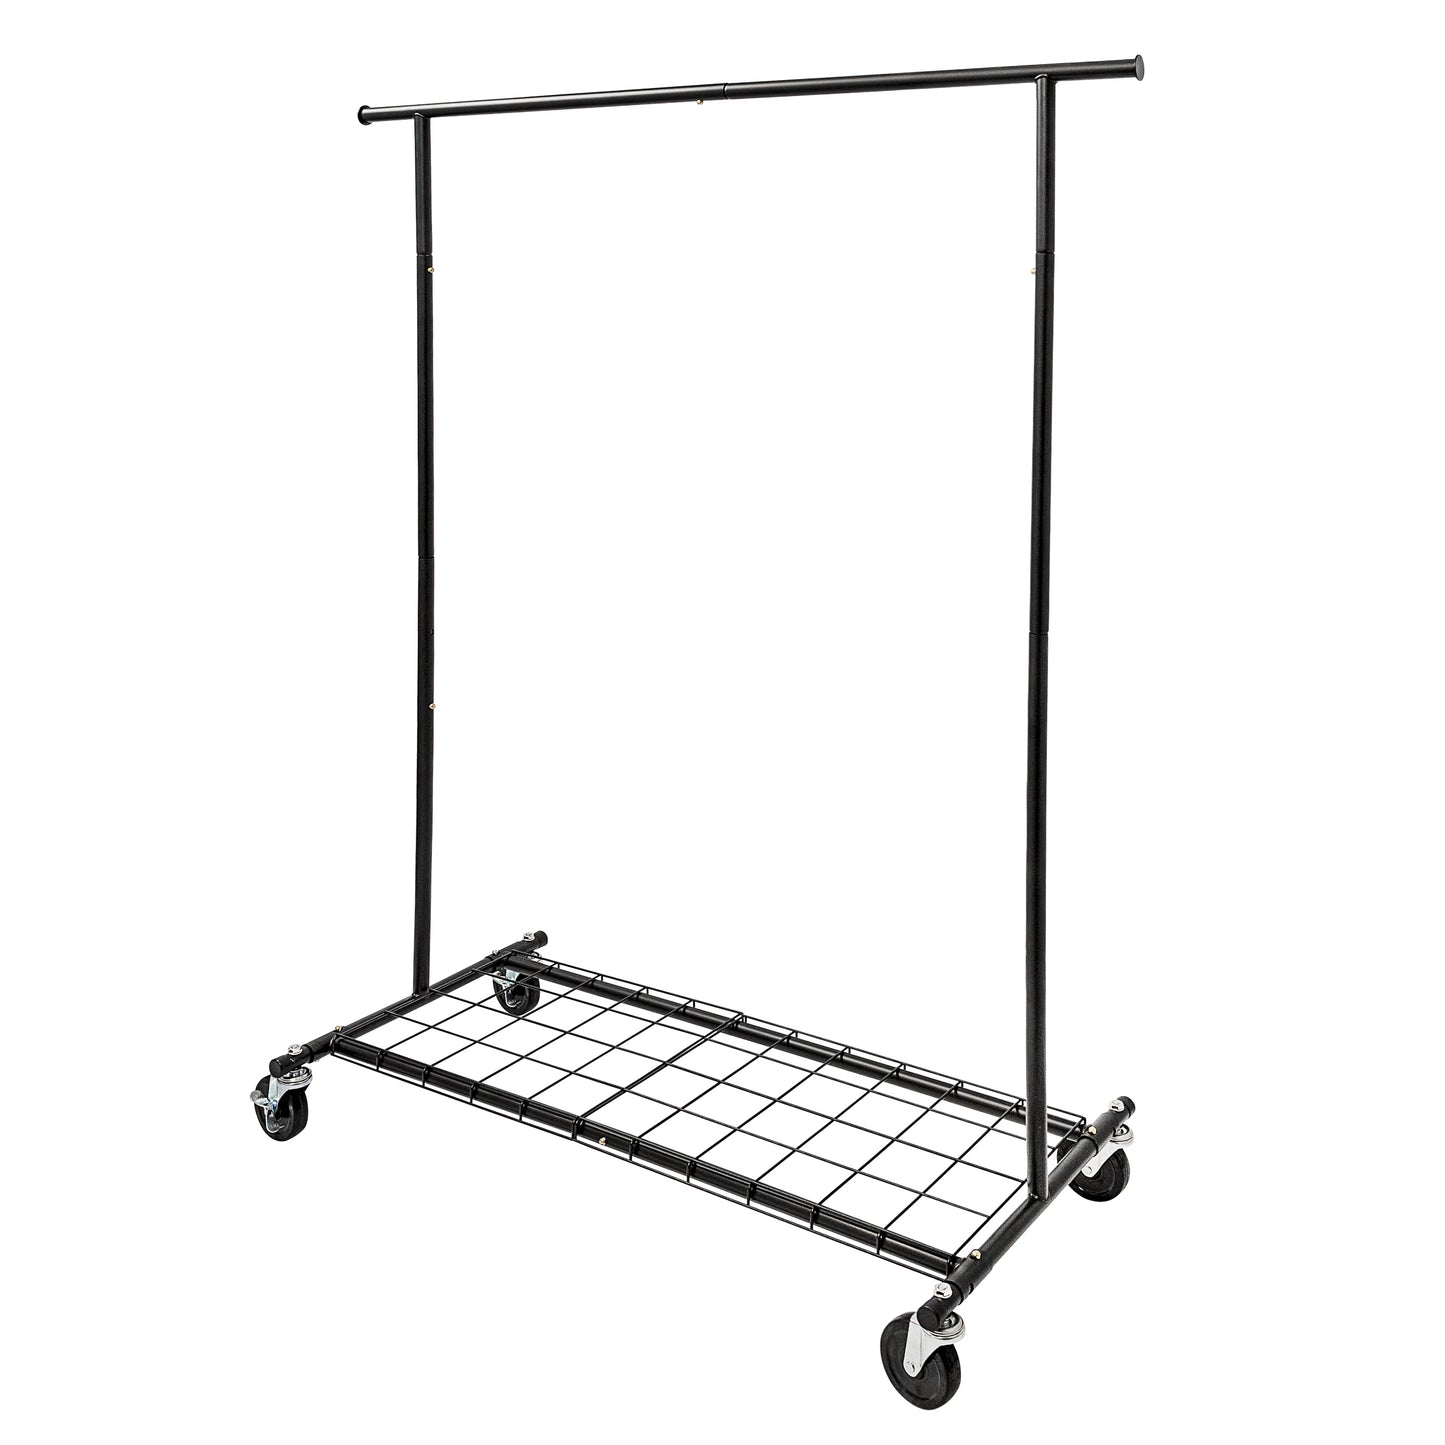 N1 Heavy Duty Matte Black Metal Rolling Garment Rack With Removable Bottom Panel (100kgs Weight Capacity) Sold in 1/5